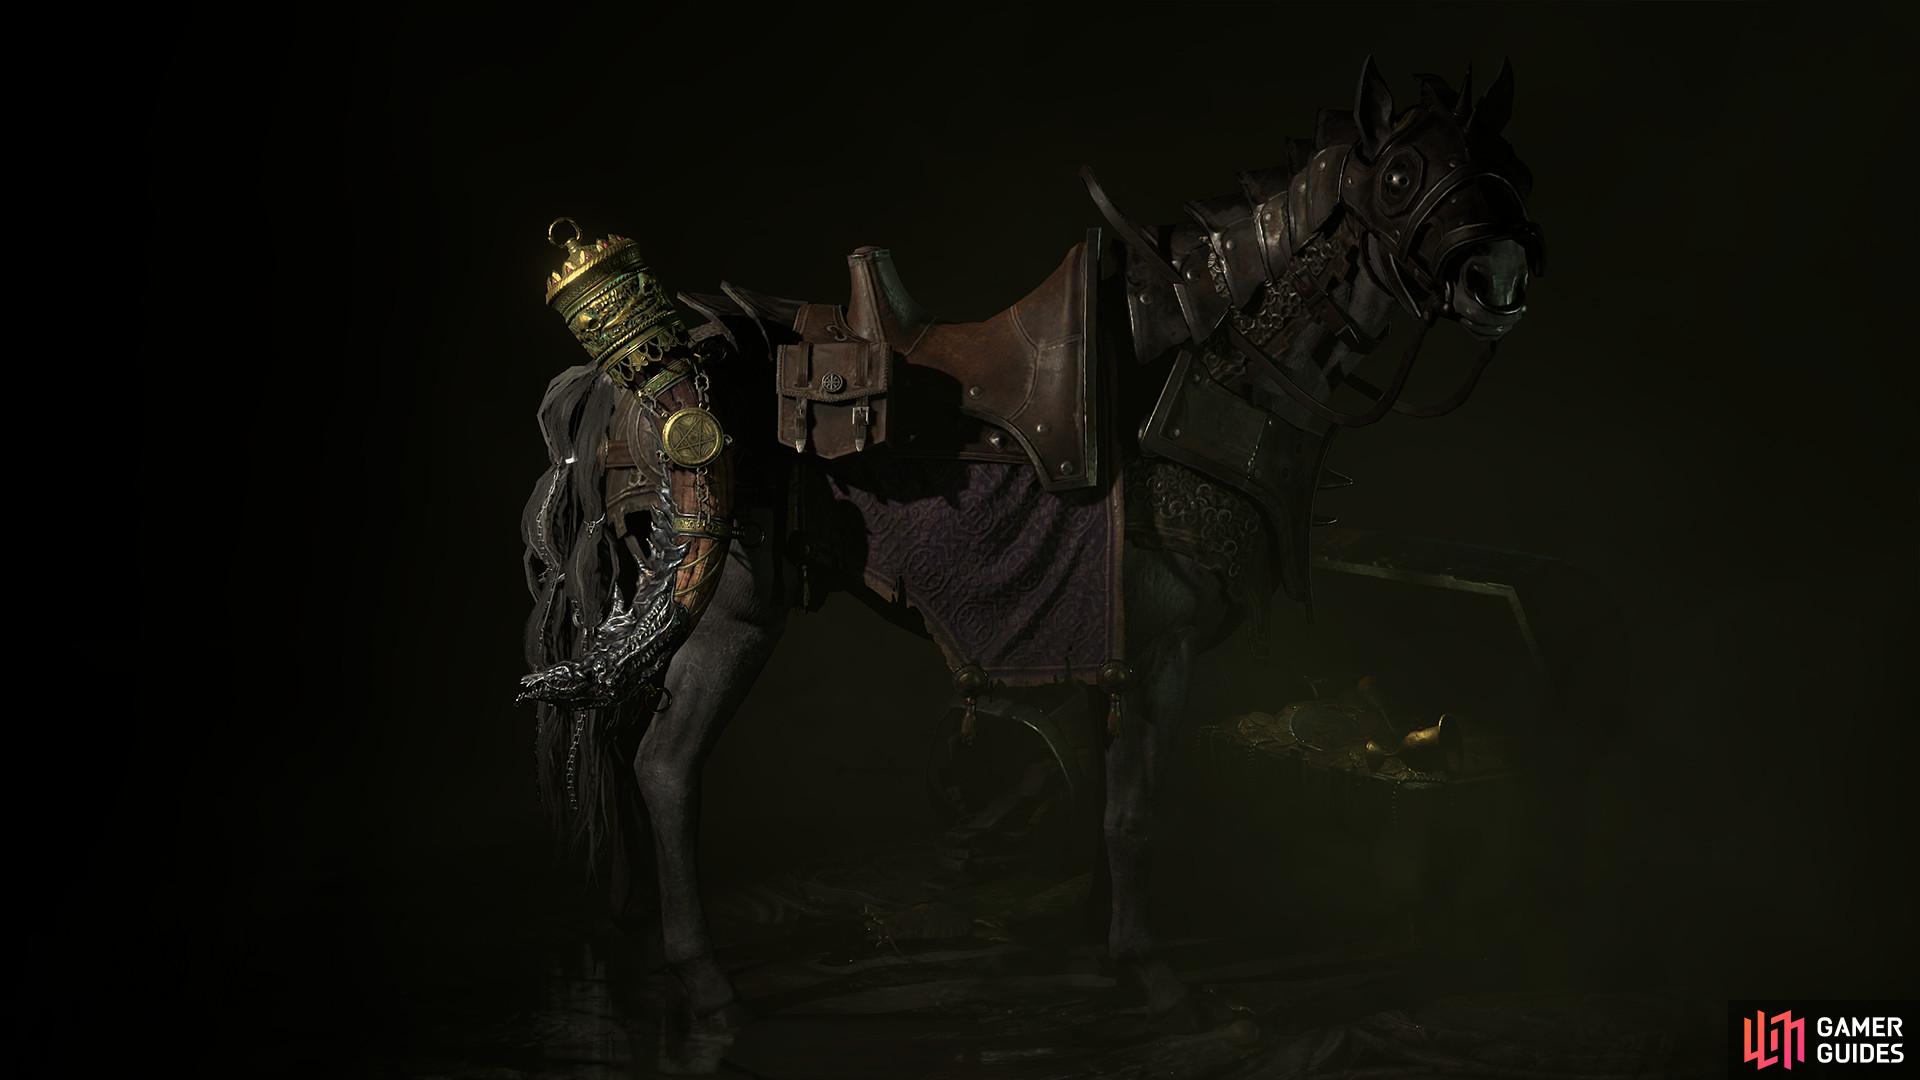 There is a limited-time mount skin available as part of the Diablo 4 Server Slam Rewards called the Cry of Ashava Mount Trophy.